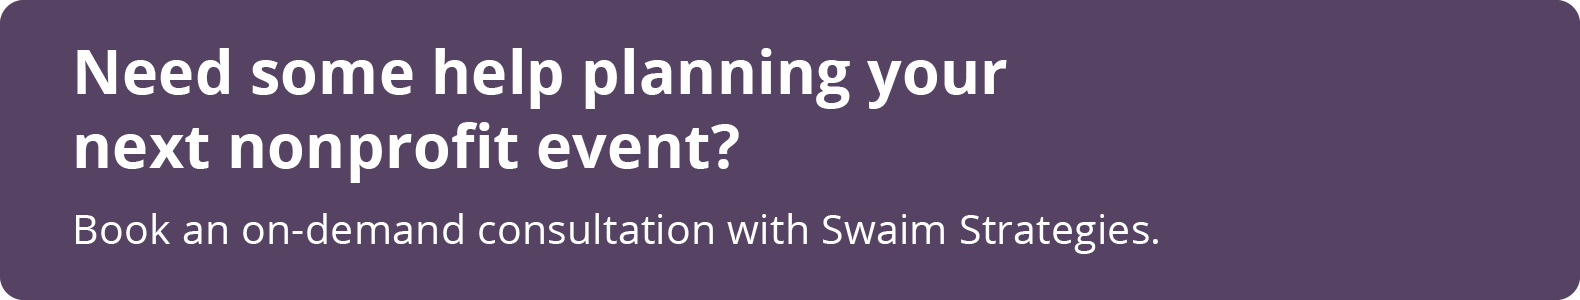 Click through to book a consultation with Swaim Strategies for your nonprofit event planning questions.